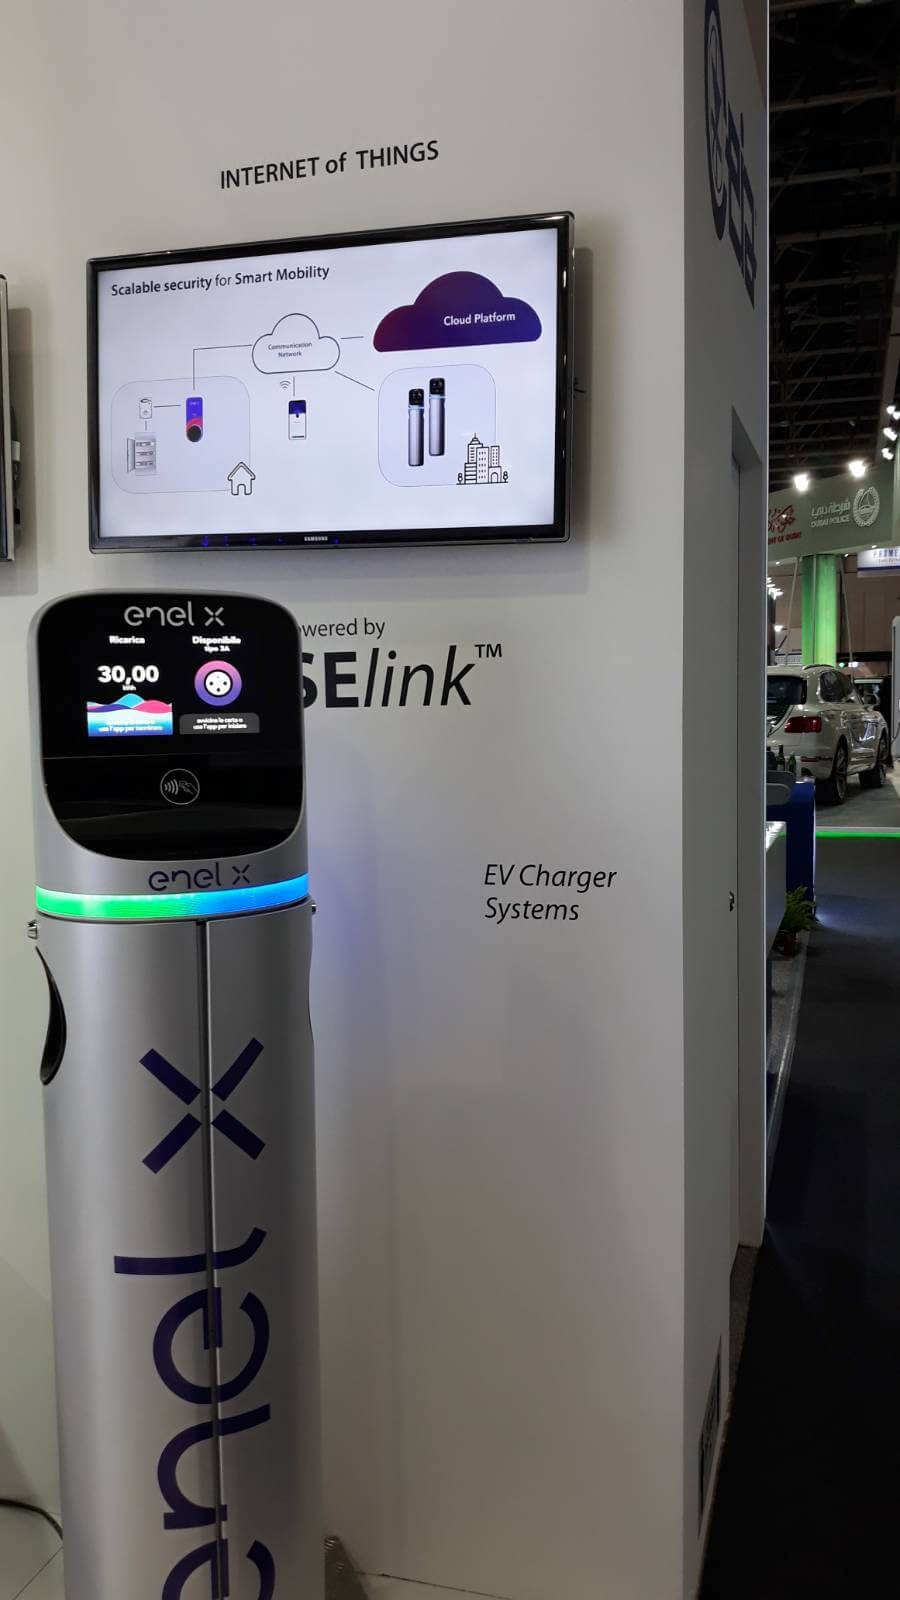 SElink scalable security for Smart Mobility